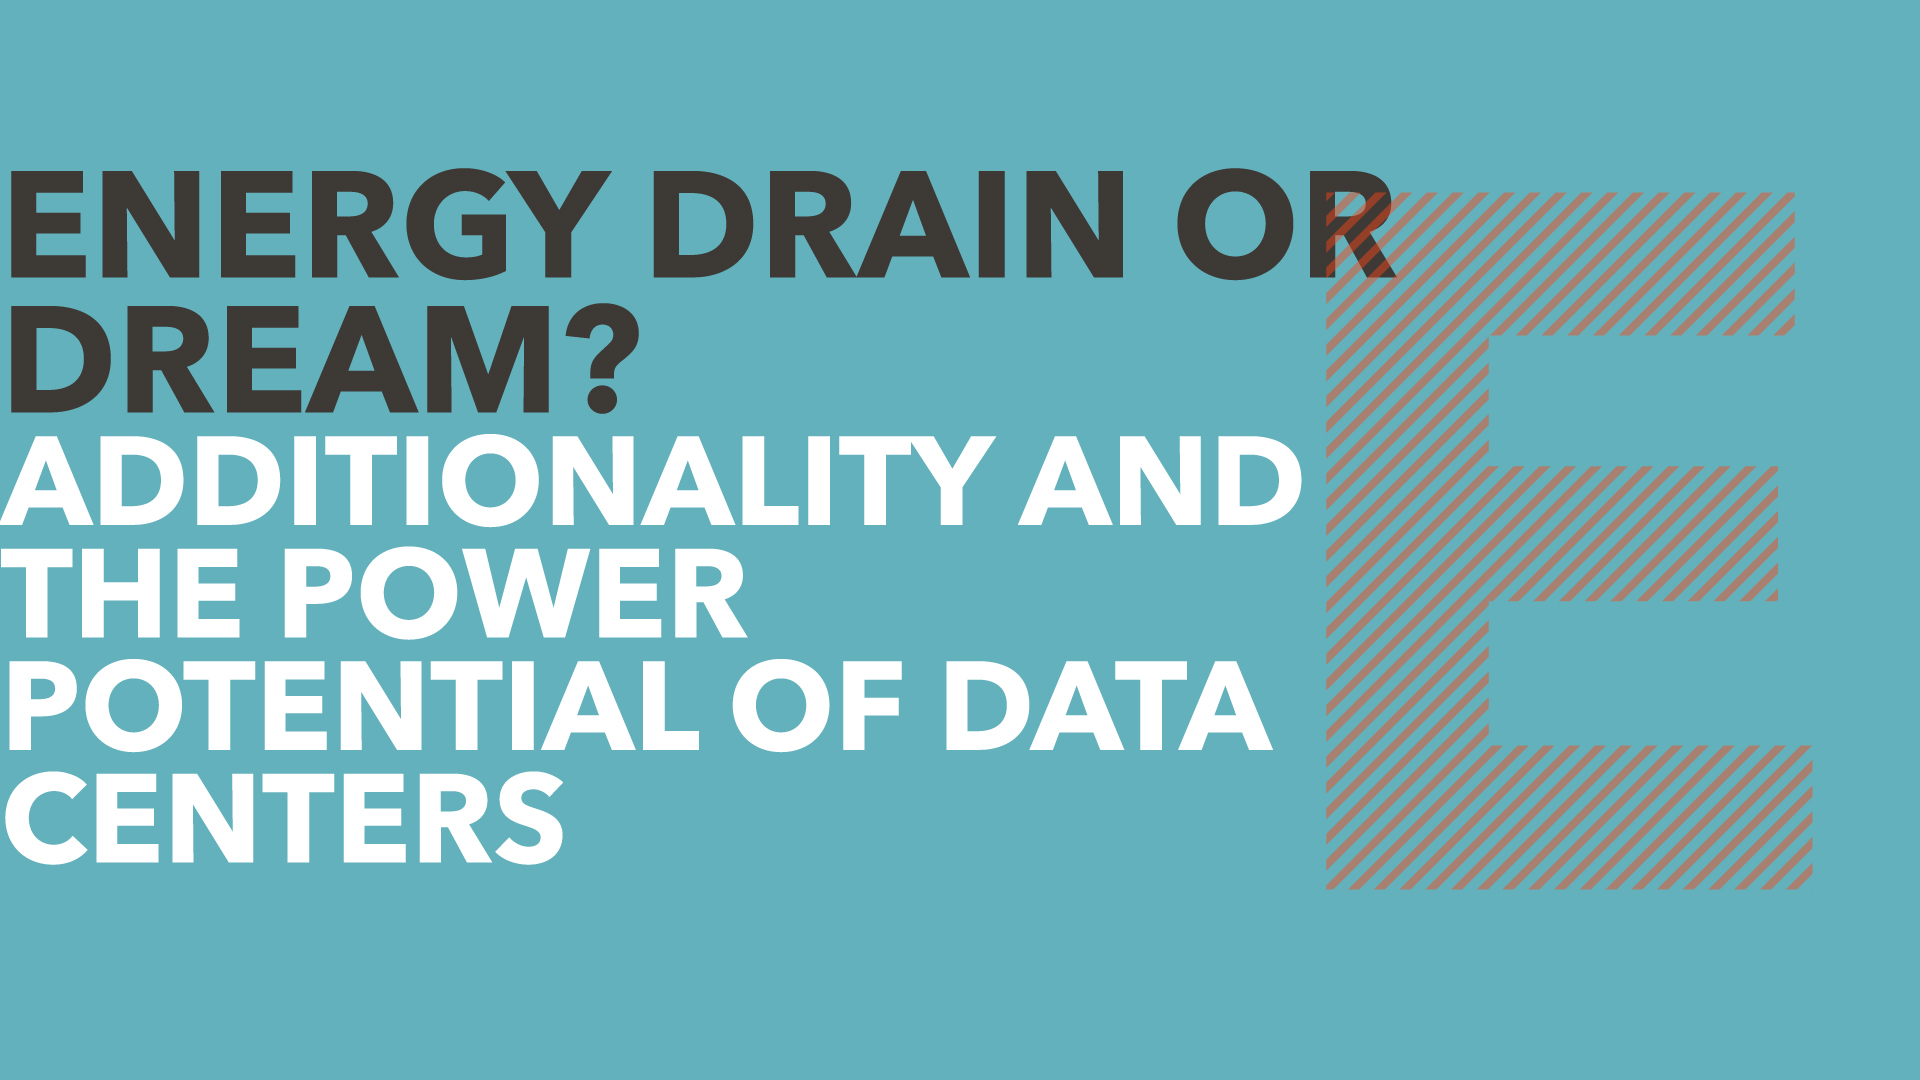 Energy drain or dream? Additionality and the power potential of data centers